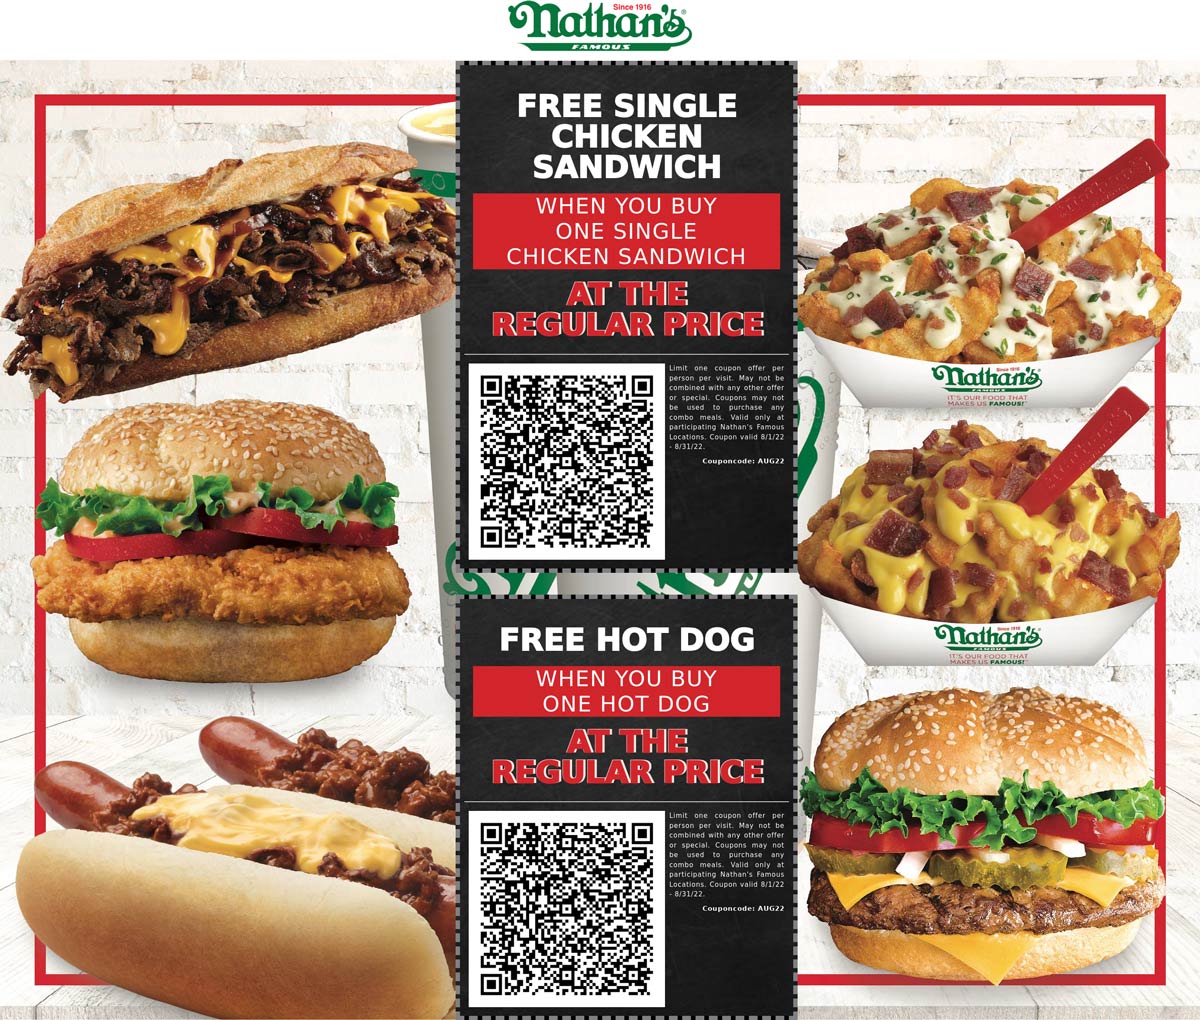 Nathans Famous coupons & promo code for [December 2022]